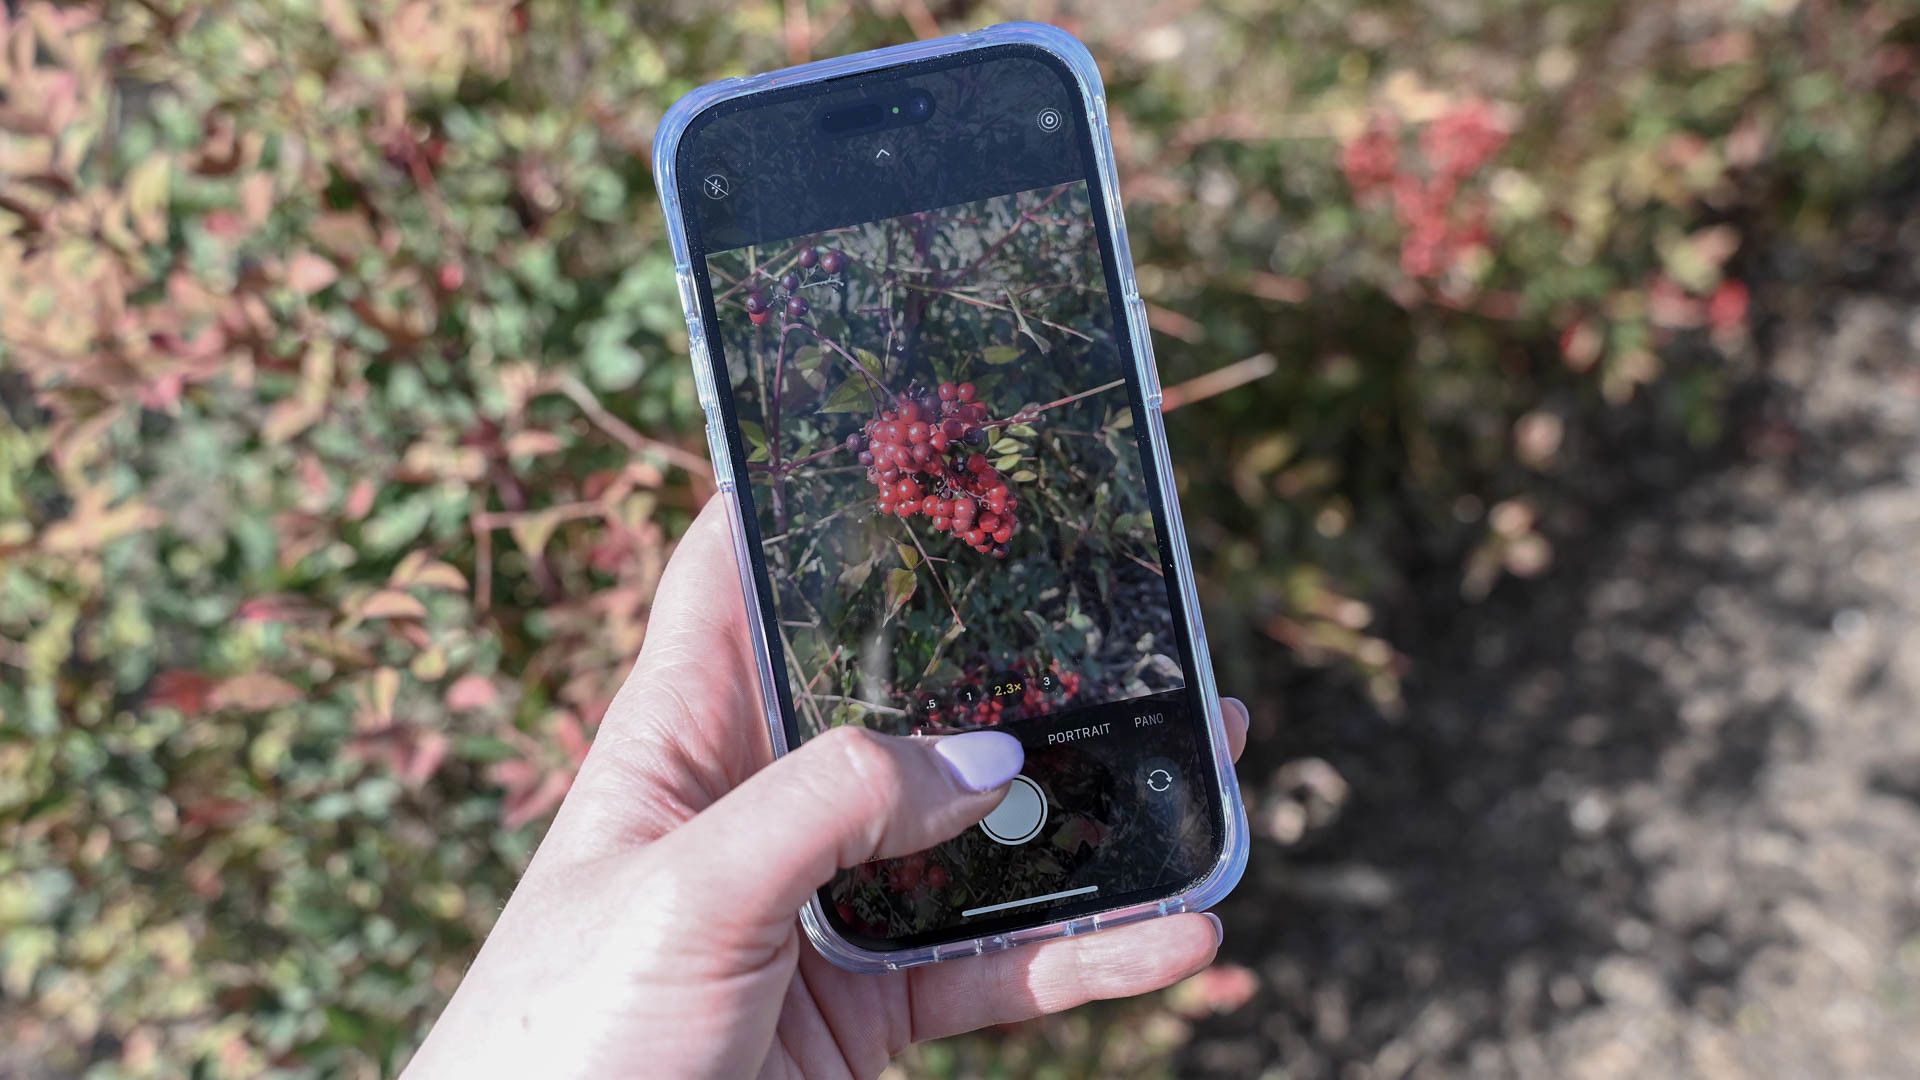 Person taking a photo of flowers with an iPhone.